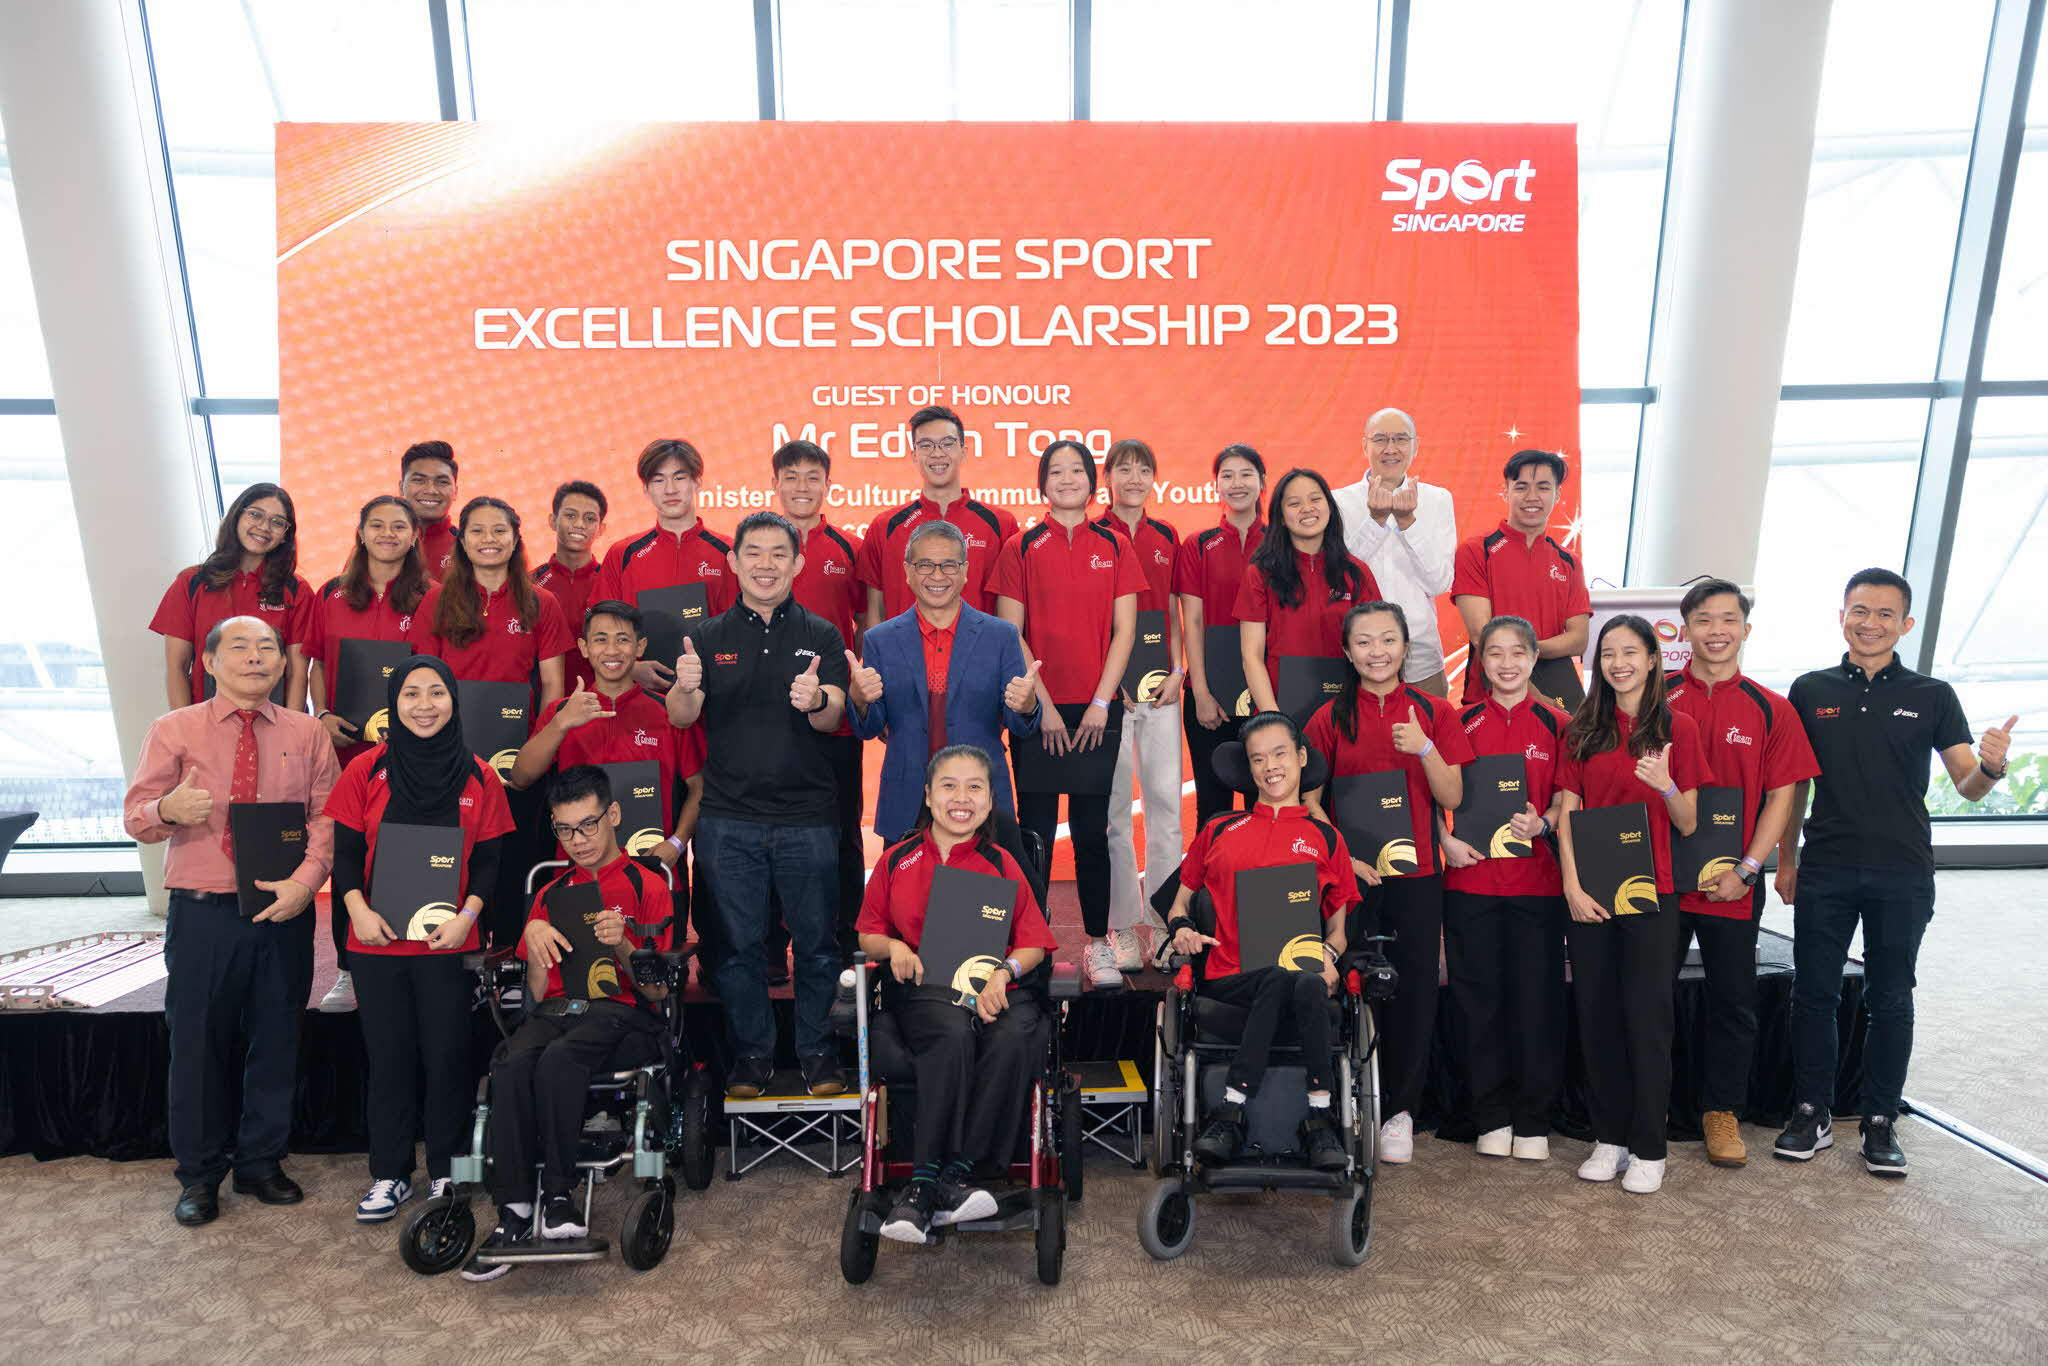 Spexscholarship Saw Its Largest Cohort Of 105 Athletes At Its 10th Anniversary